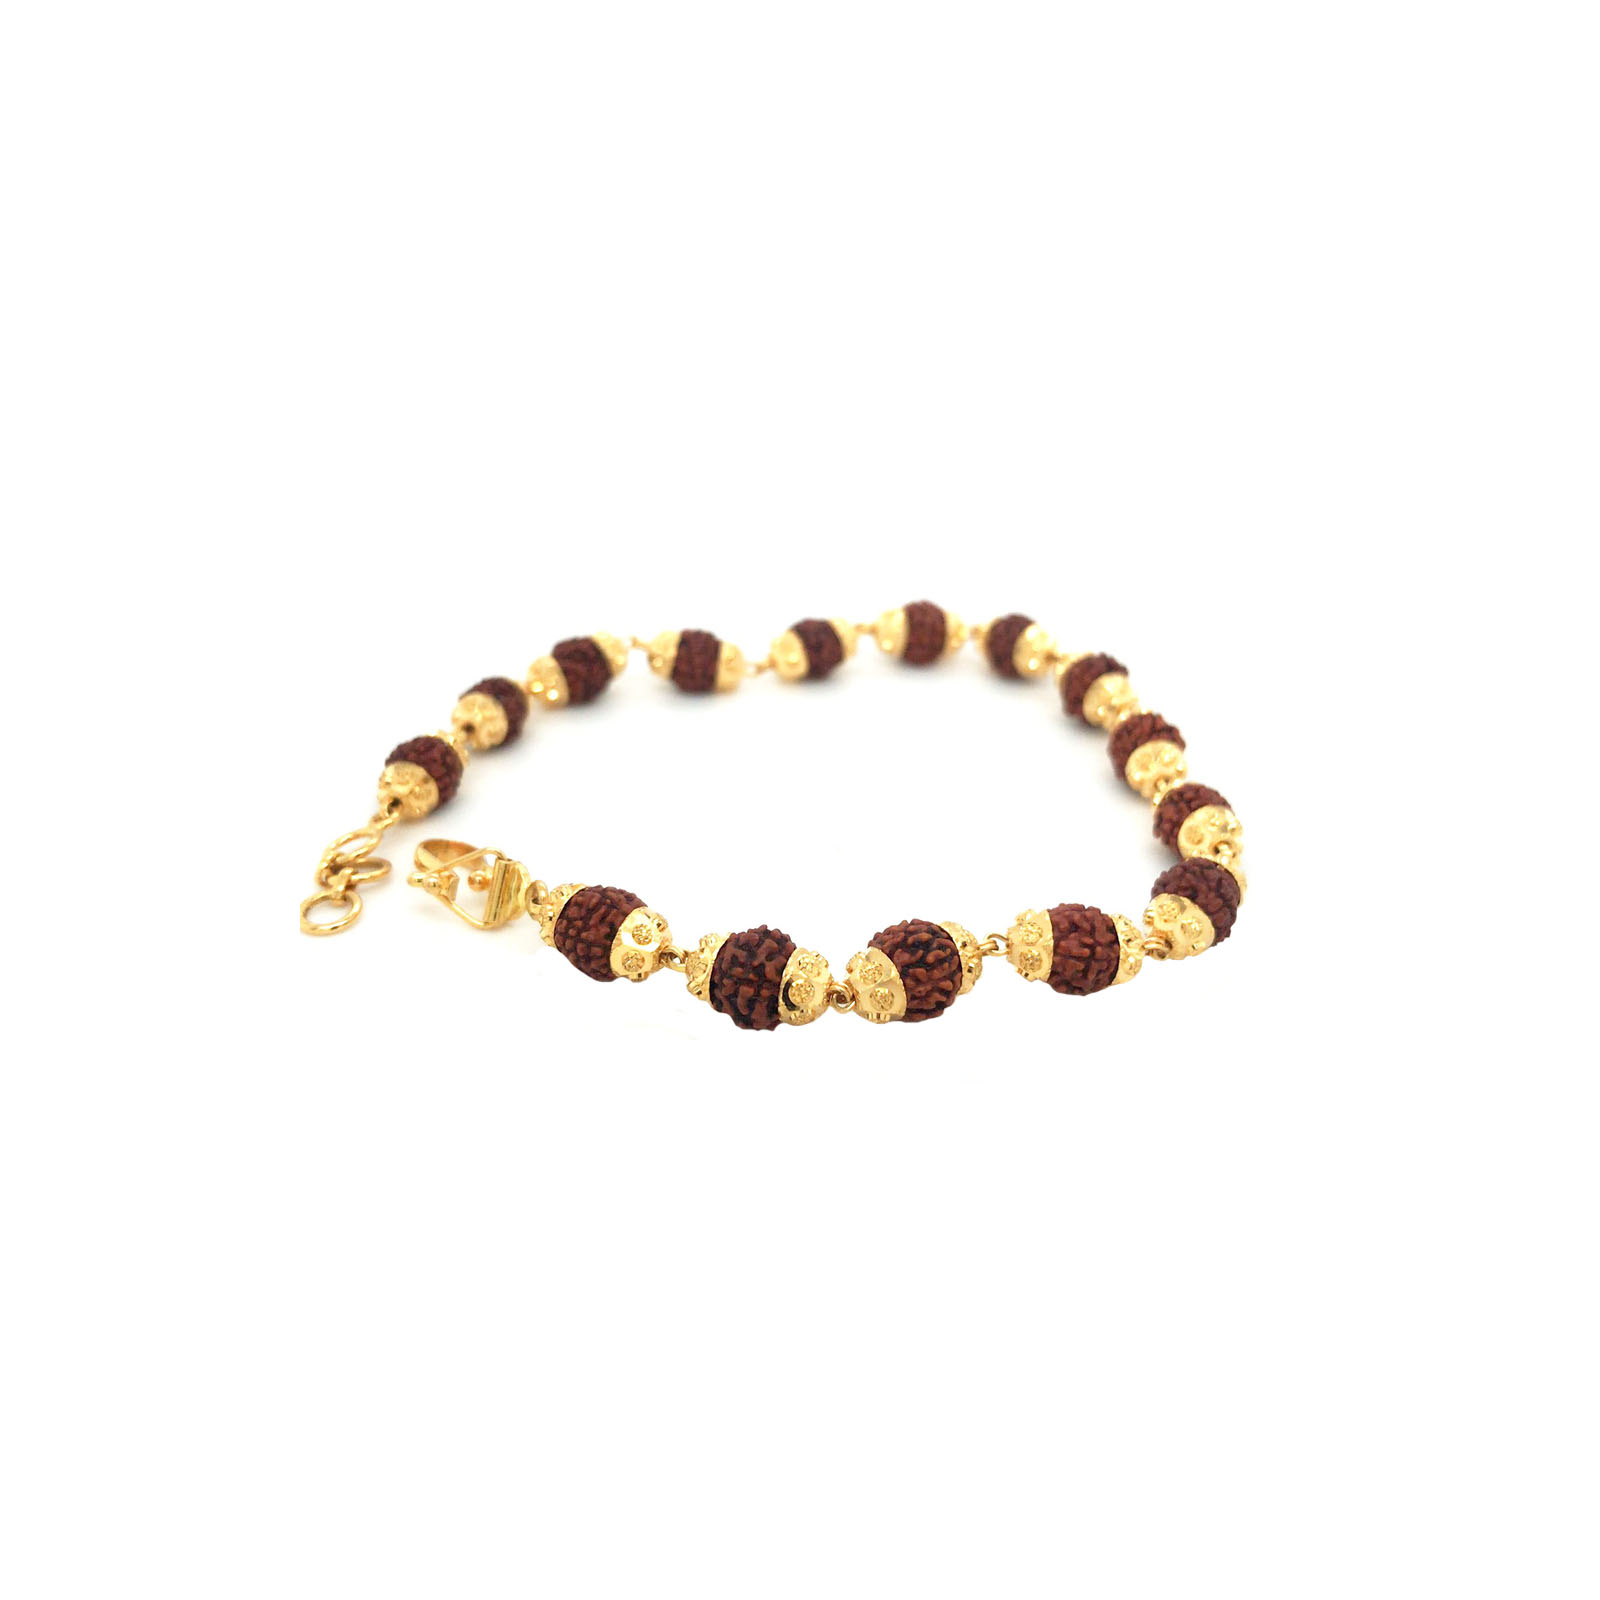 Buy 22ct / 22k Yellow Gold & Cz Curb Gents / Mens Bracelet 8 Inches 916  Online in India - Etsy